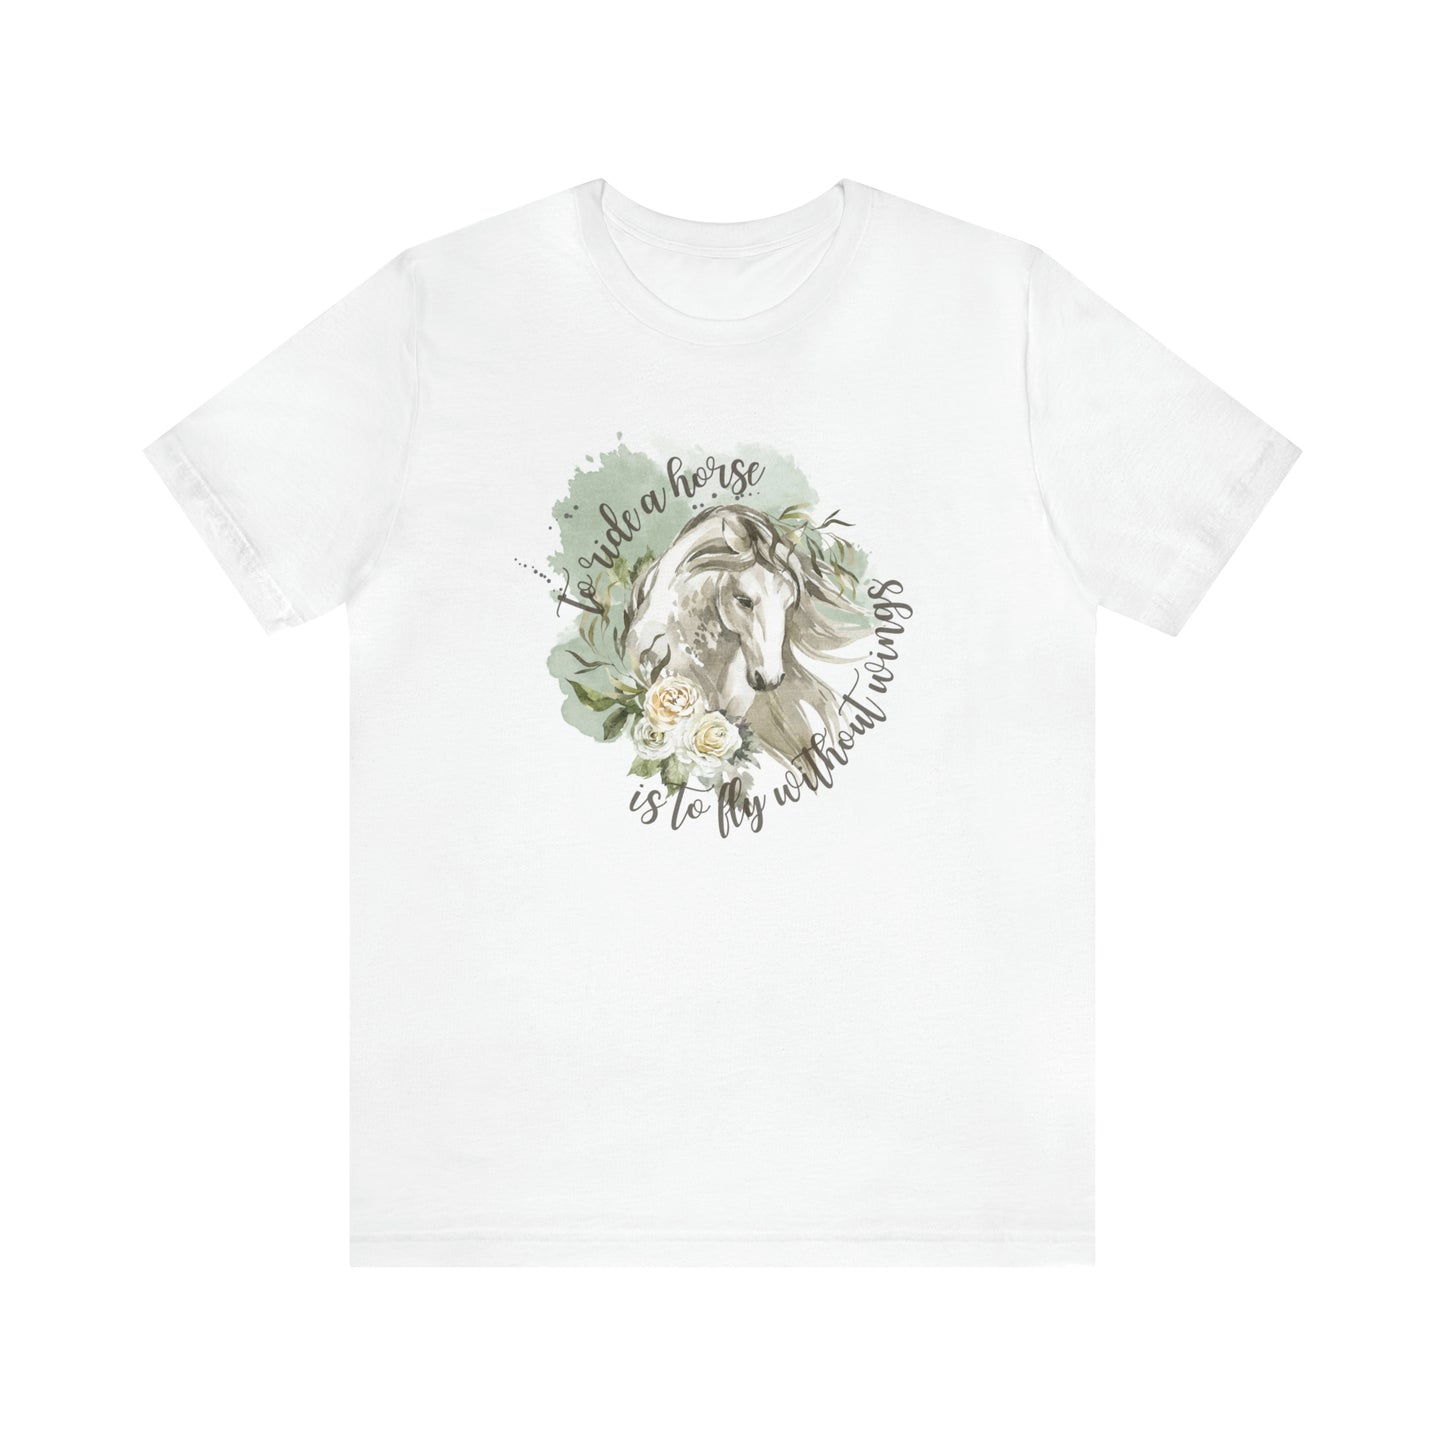 FLY WITHOUT WINGS - WHITE TEE